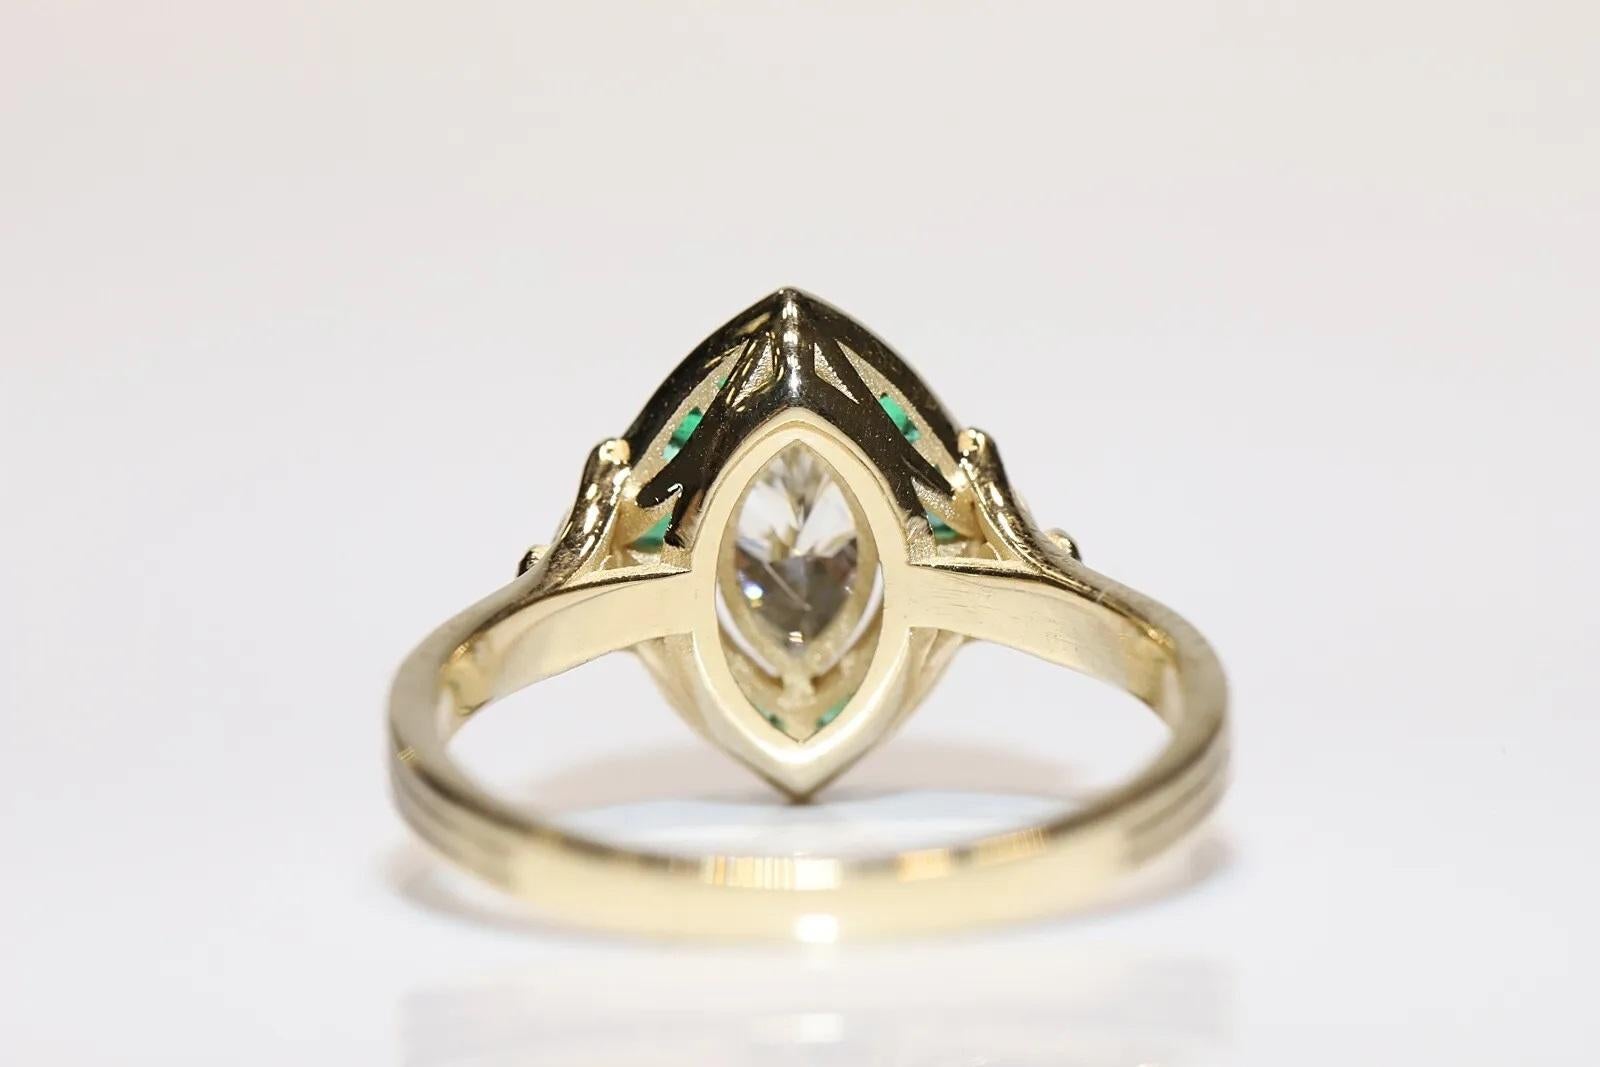 New Made 14k Gold Natural Marquise Cut Diamond And Caliber Emerald Ring For Sale 1